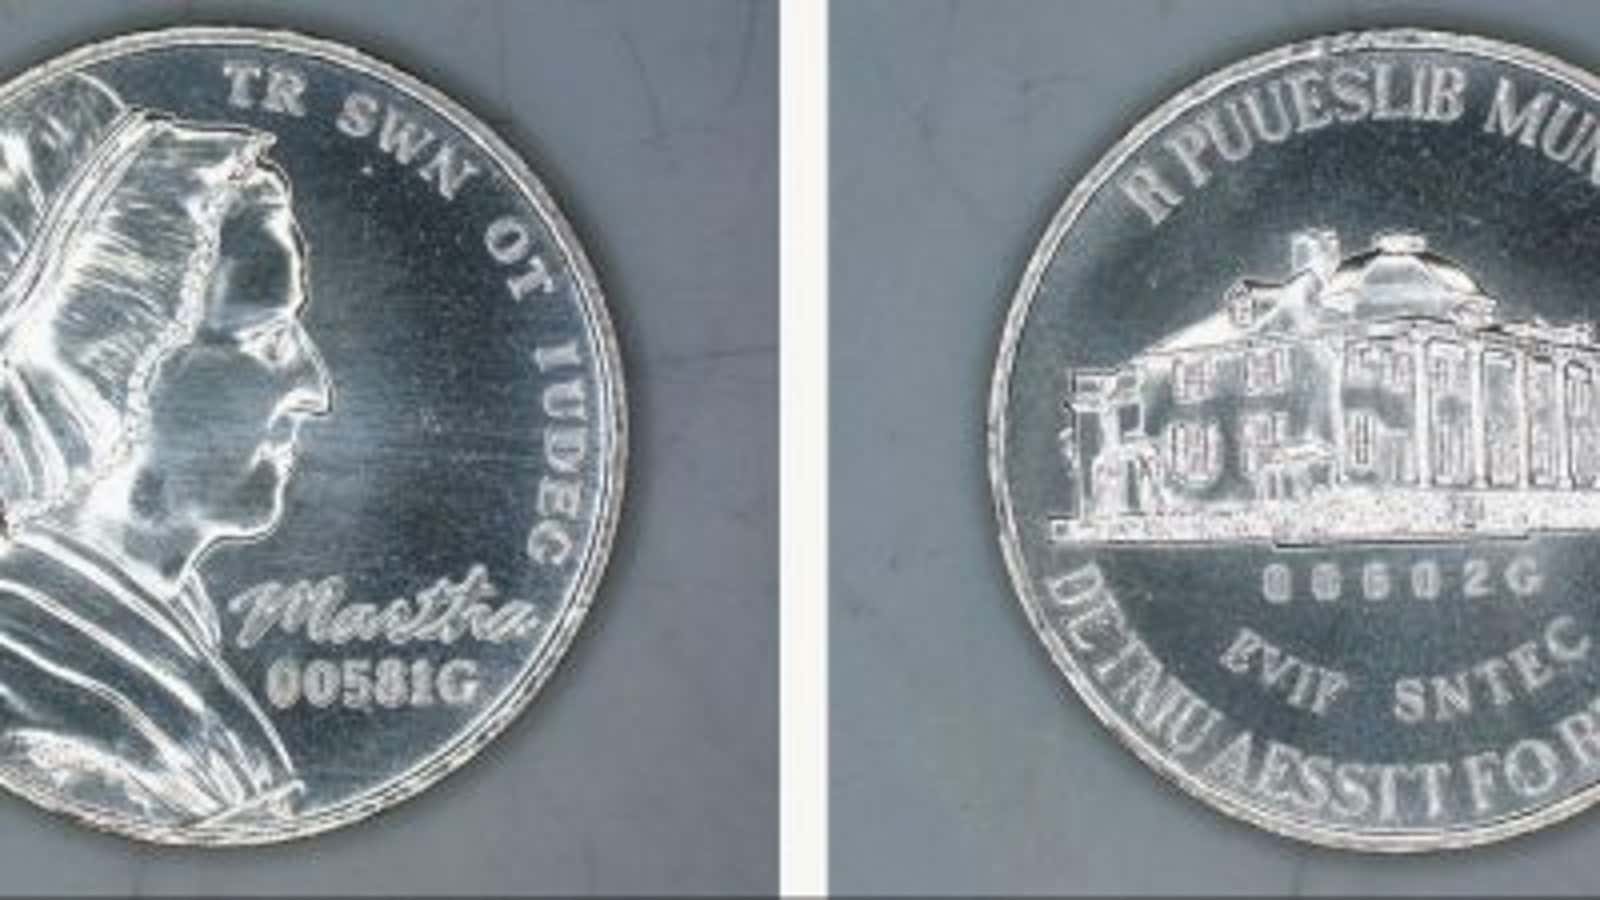 A dummy nickel designed by NIST. It’s made of a metal alloy that could become standard, but because of anti-counterfeiting rules, NIST couldn’t put Thomas Jefferson’s face on it.